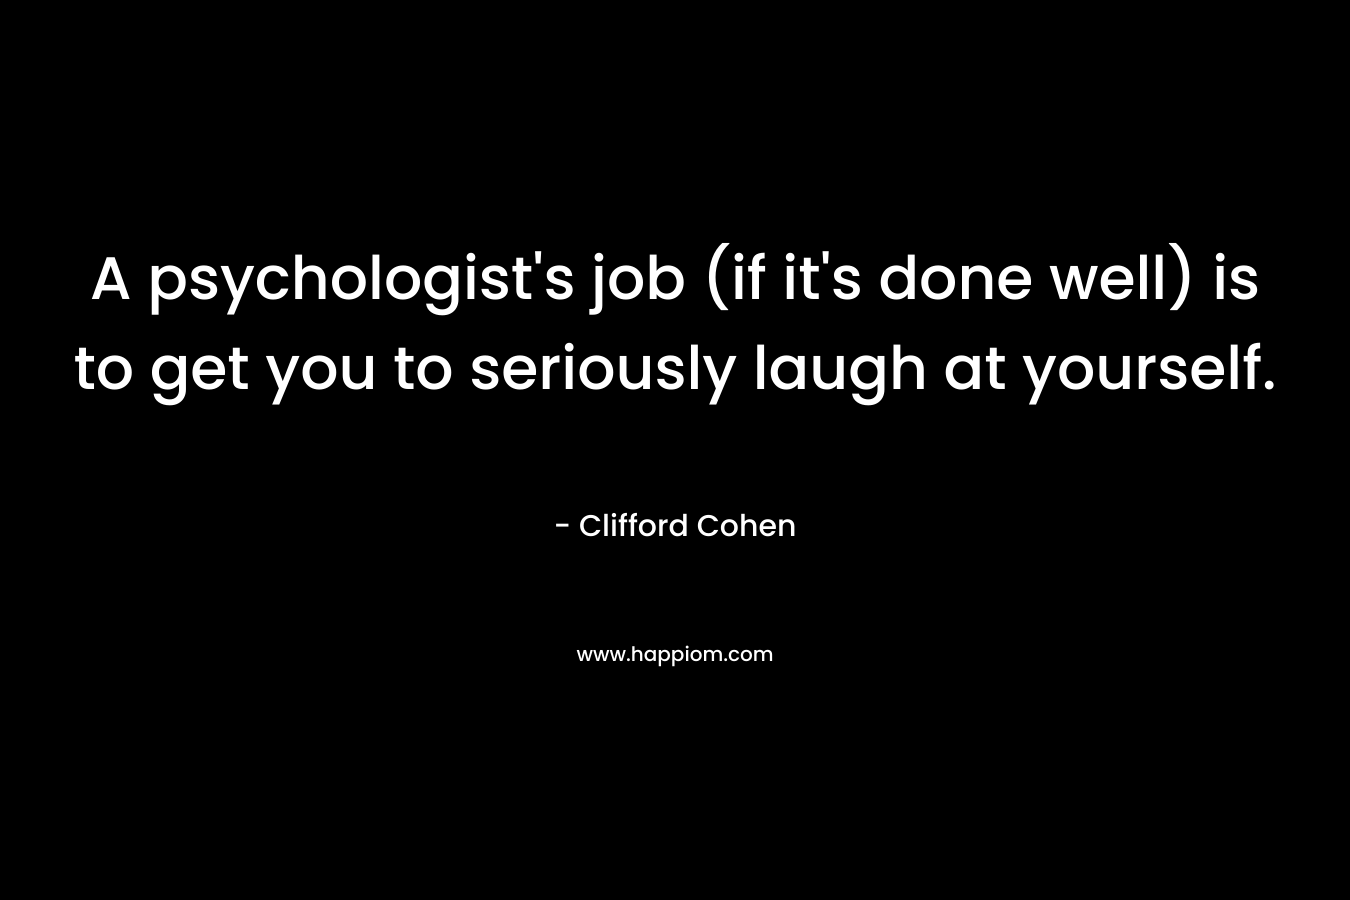 A psychologist's job (if it's done well) is to get you to seriously laugh at yourself.